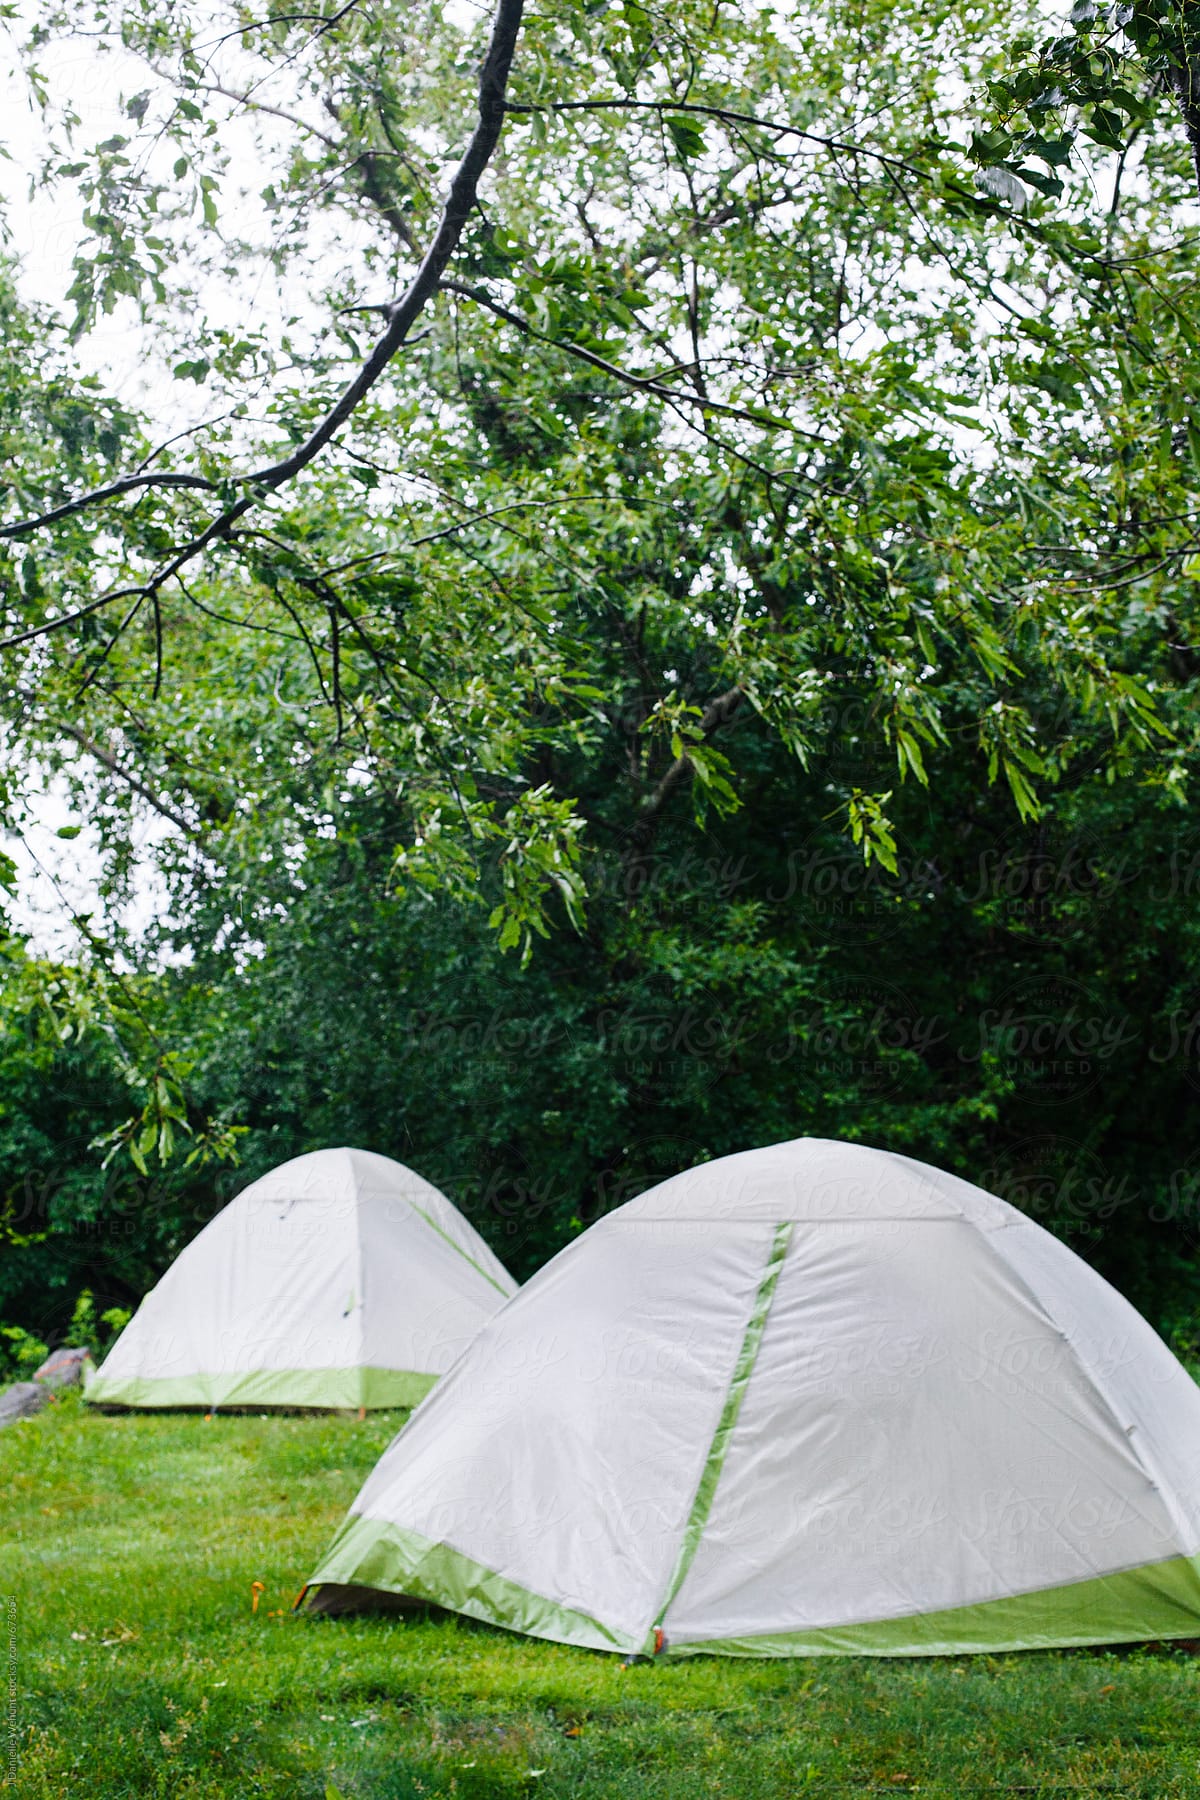 Tents in the rain at a camping ground.